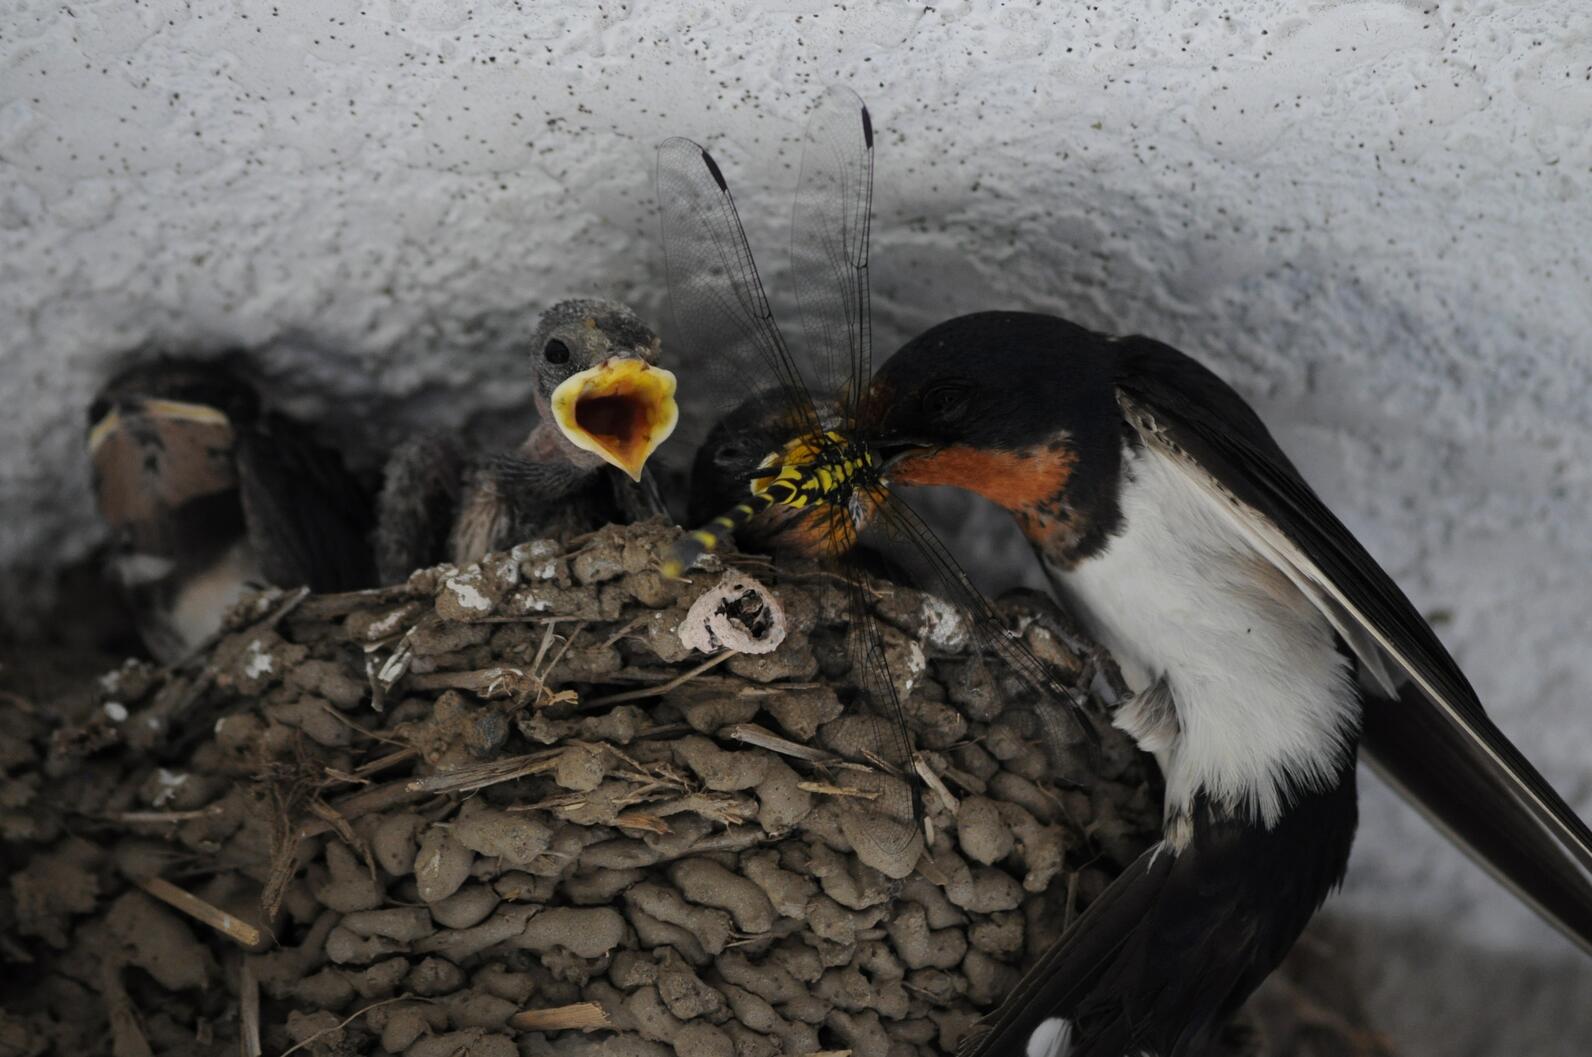 A mother Barn Swallow attempts to feed her nestlings the insect prey she captured. The Baby birds mouths are open with hunger. The nest is lumpy and made of mud, looking like it's located under the eve of a building. 